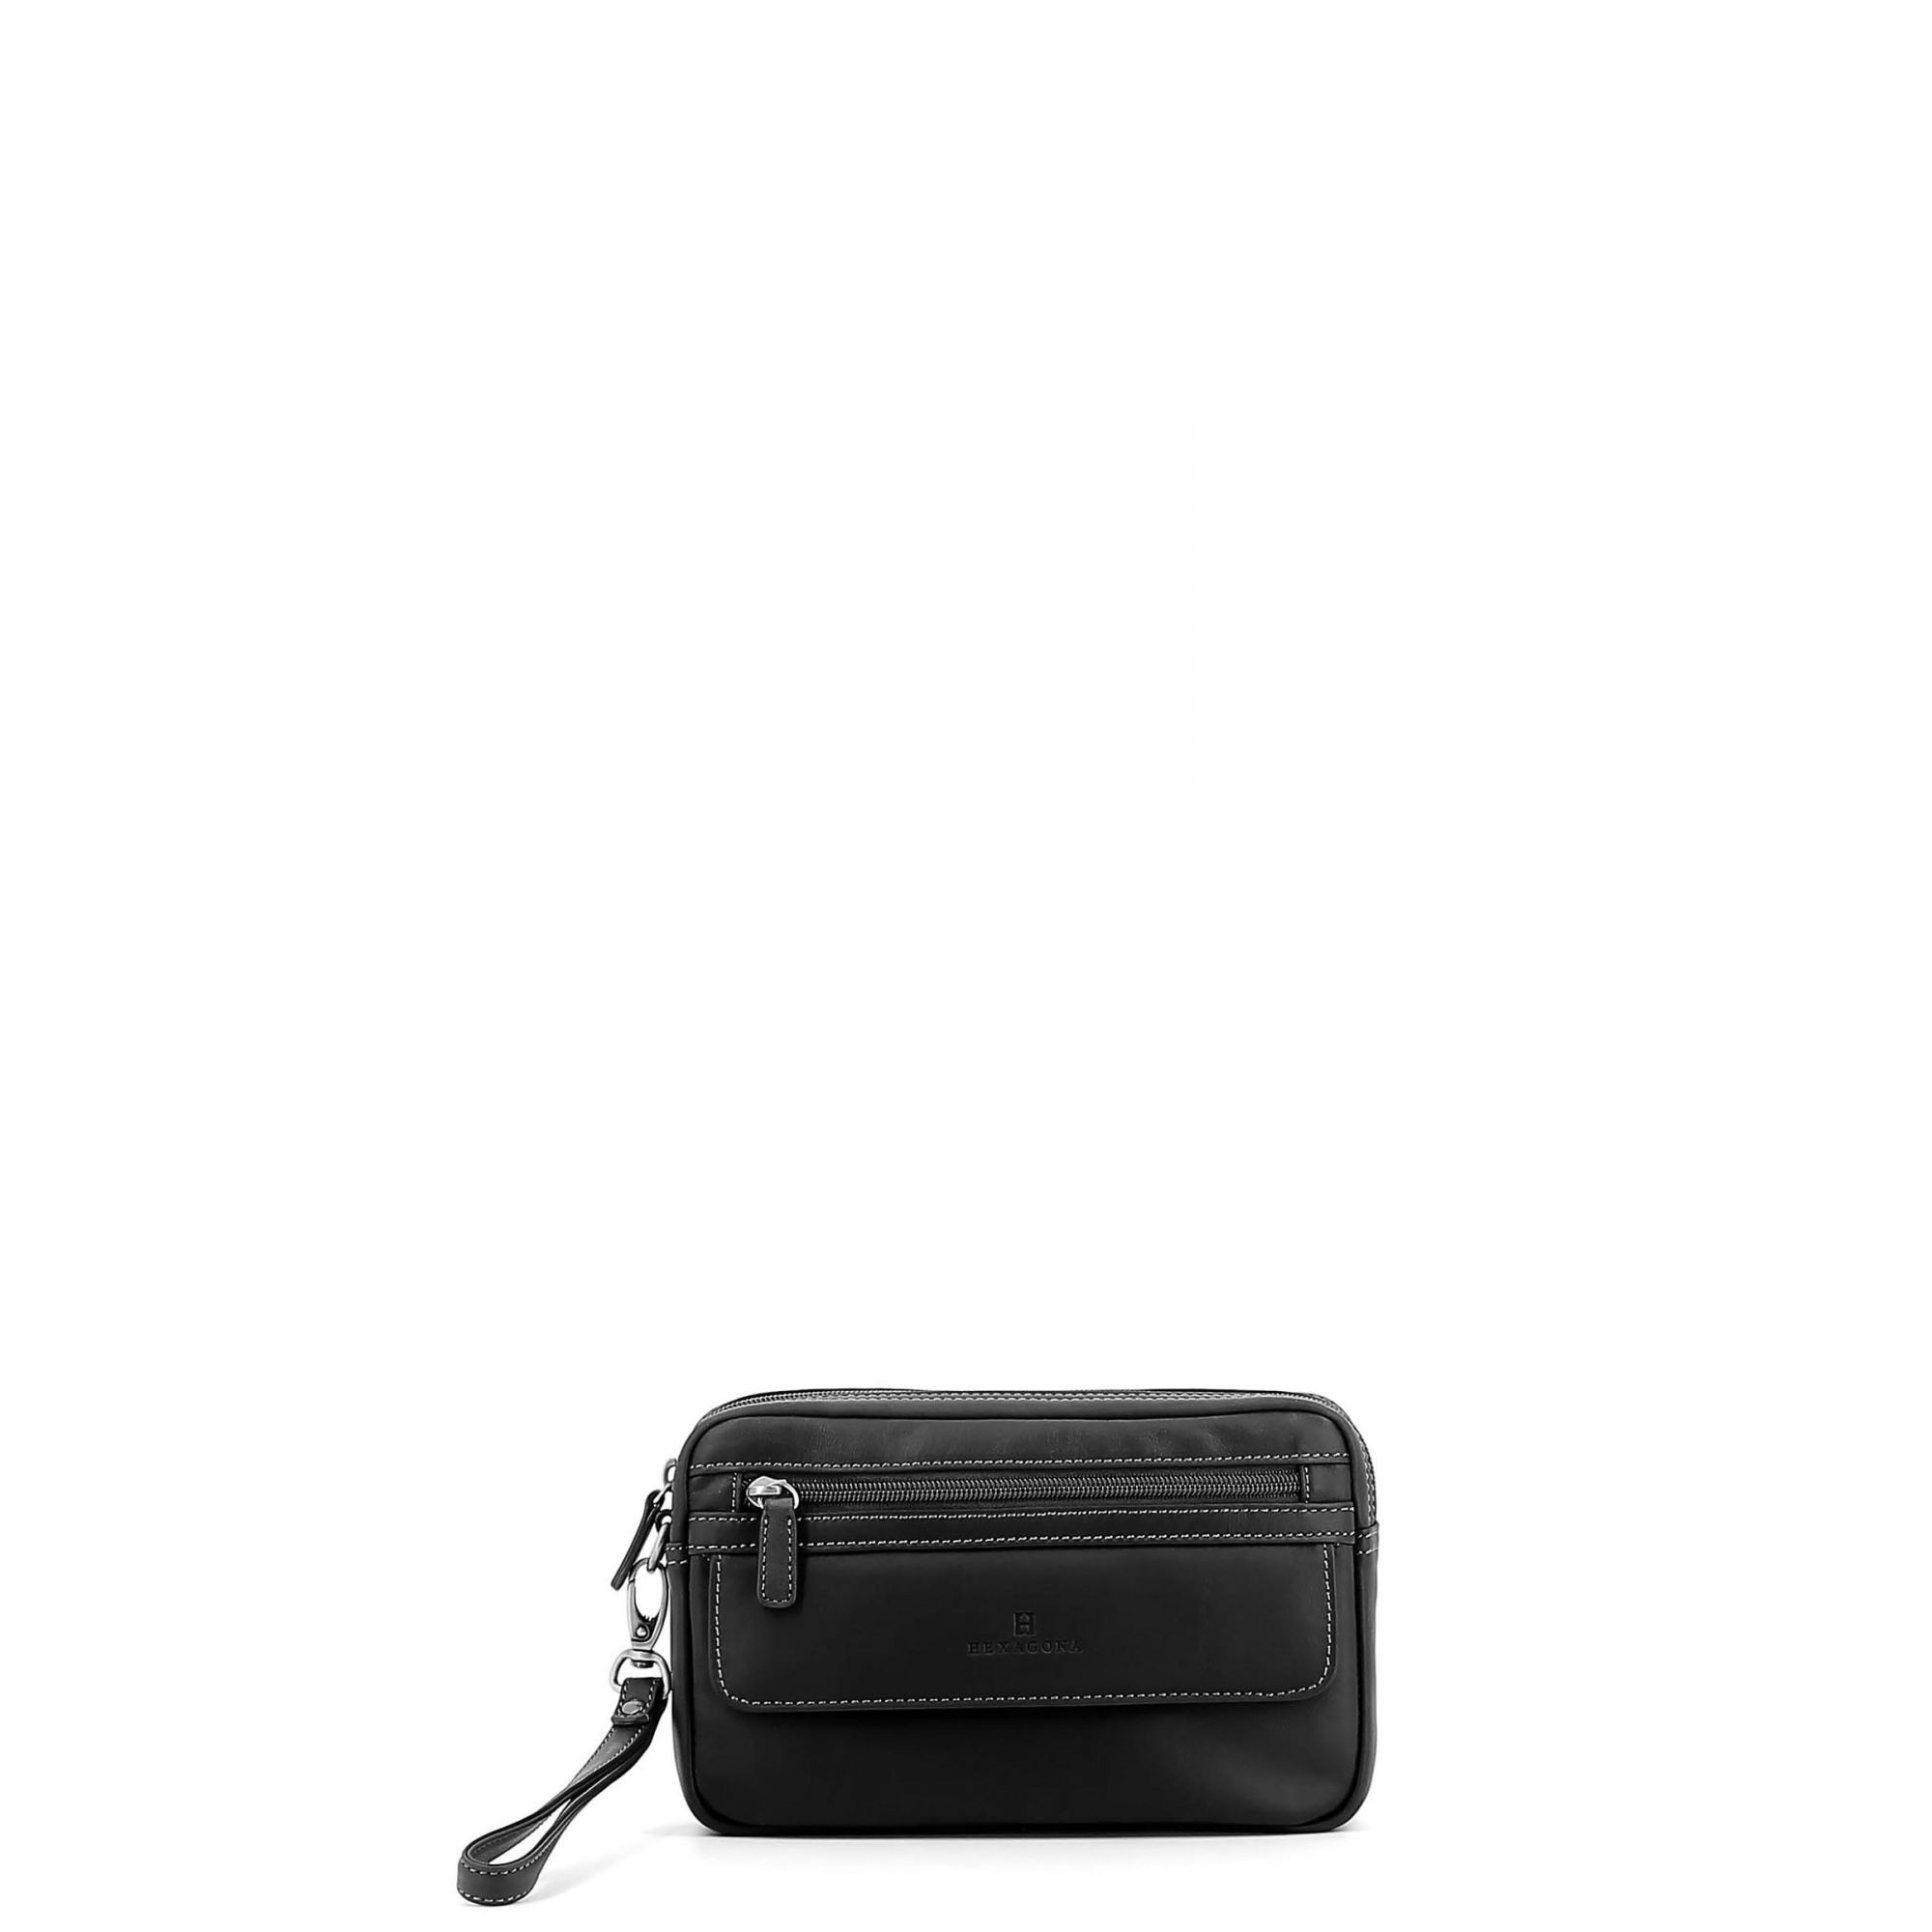 leather hand clutch bag 154193